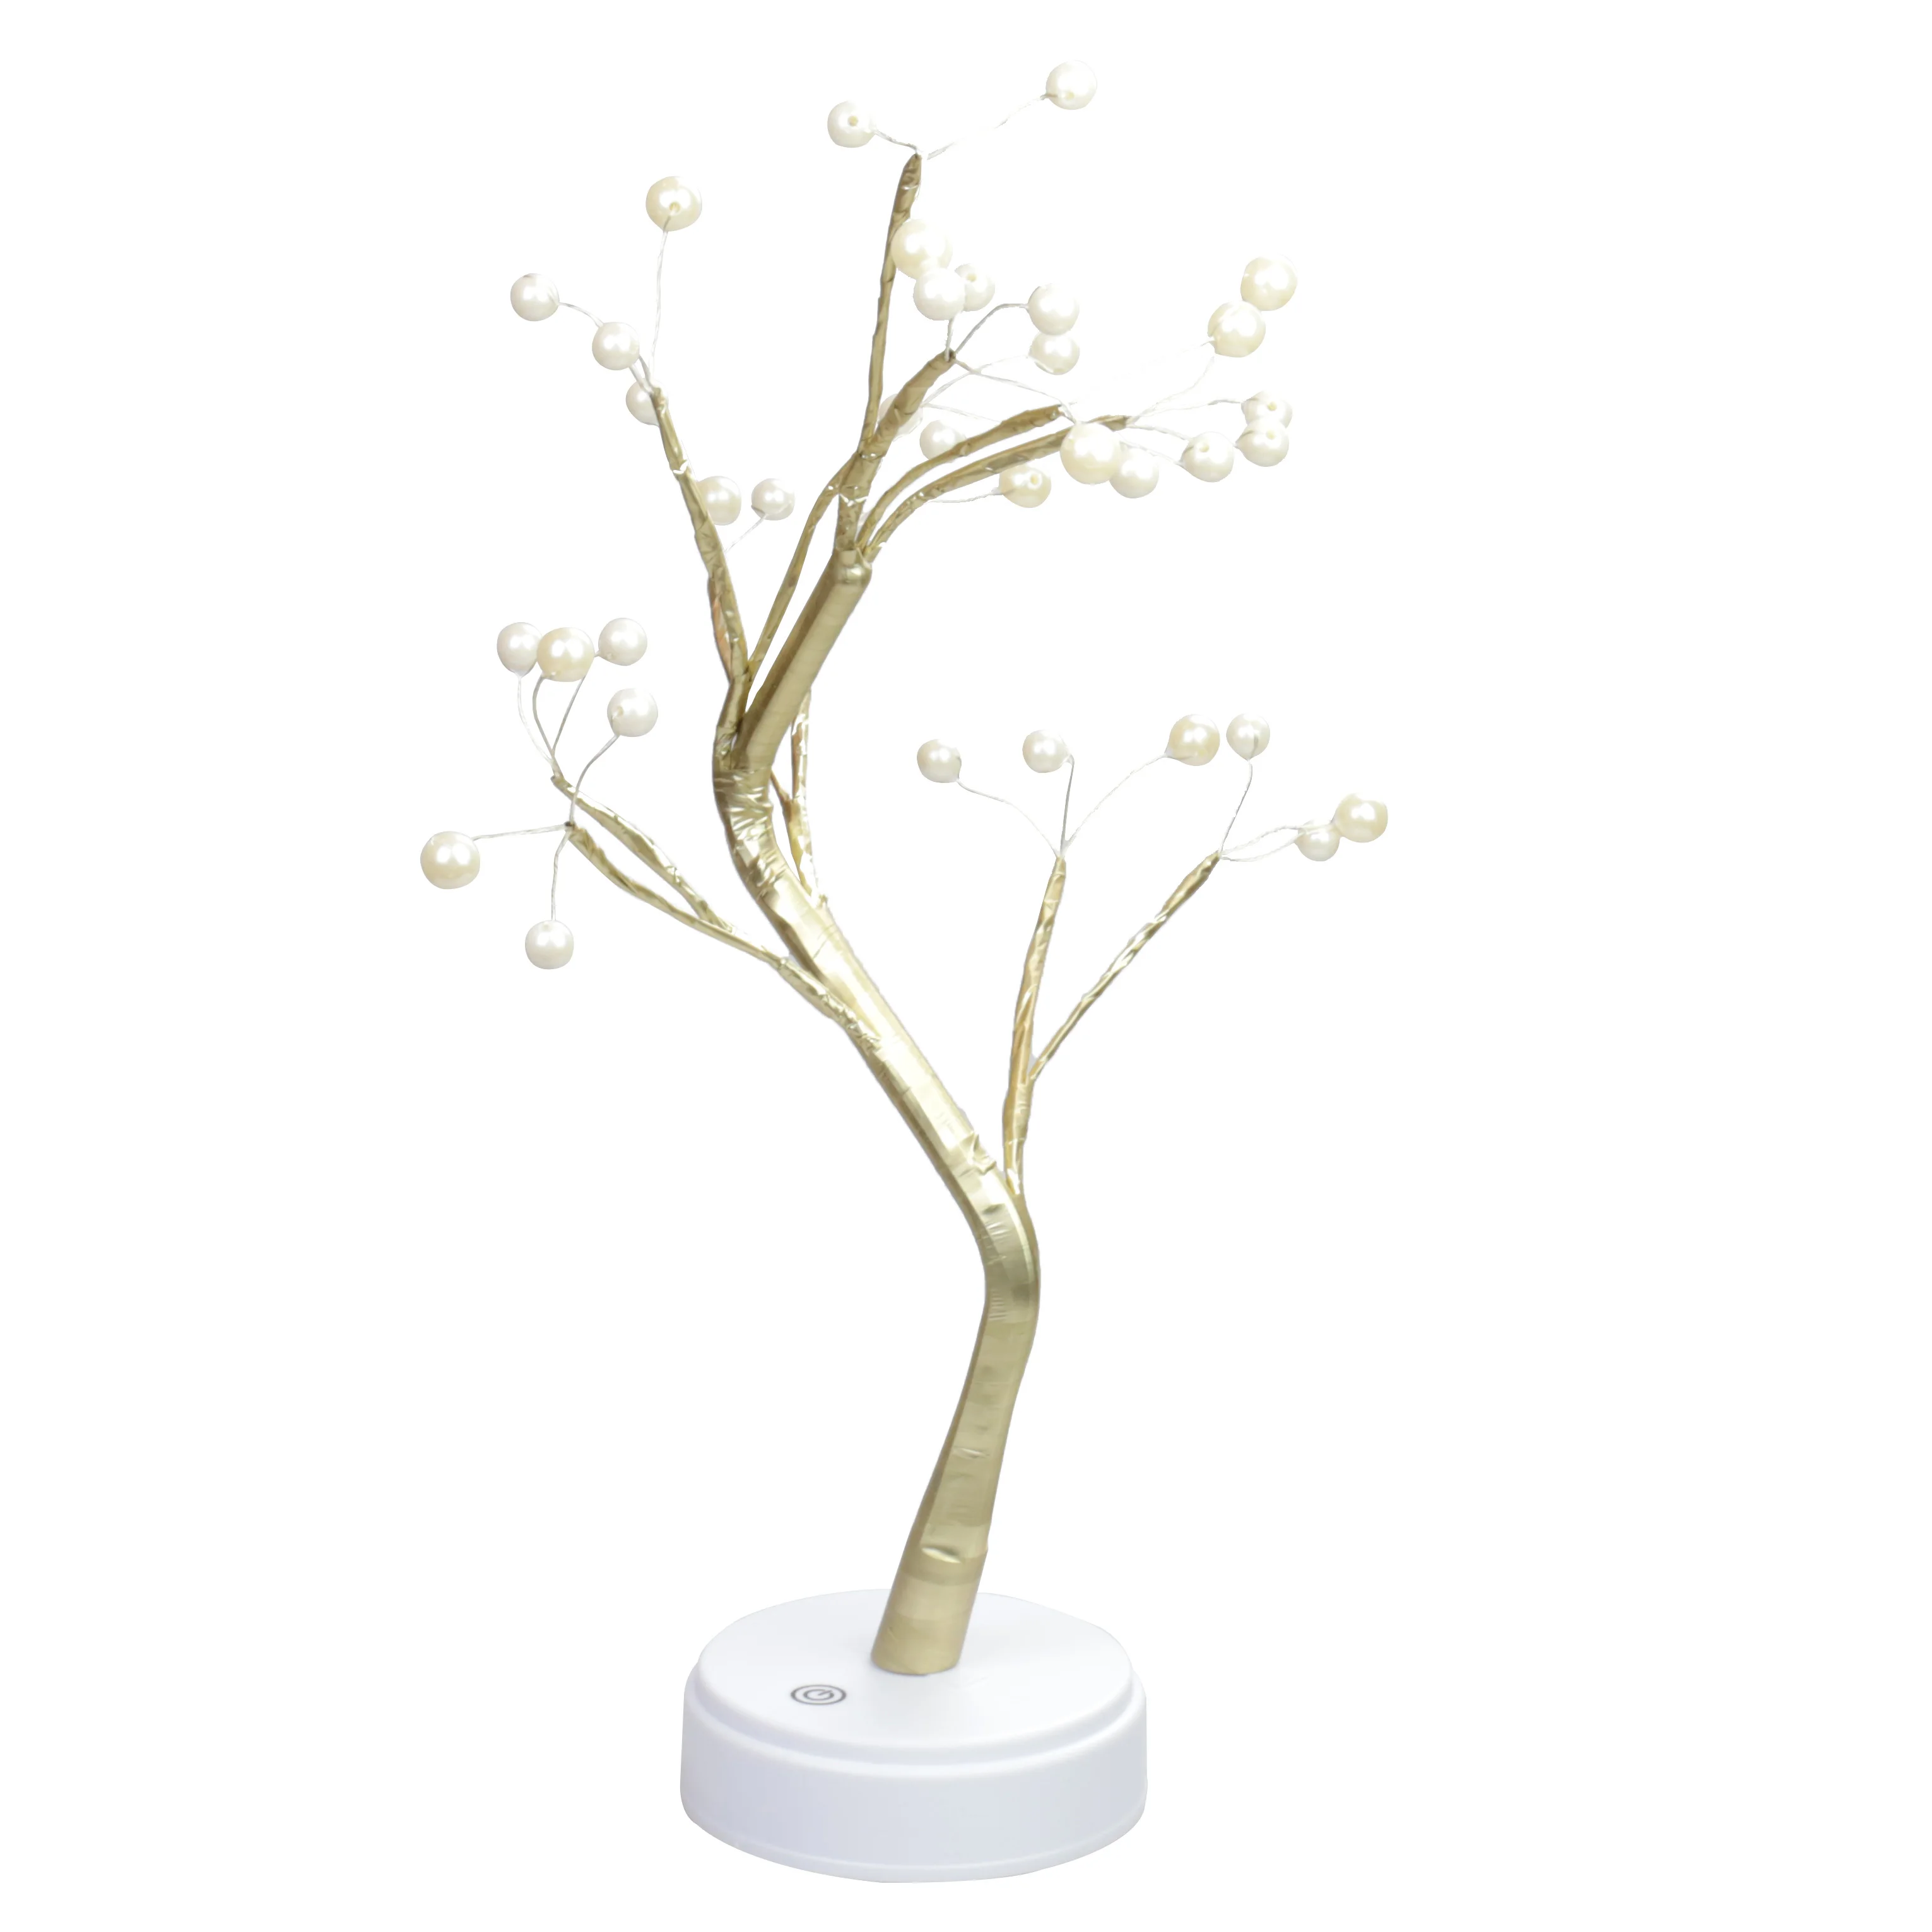 New Pearl Decorative Led Shimmer Tree Desk Lamp Touch Switch solar lights walmart